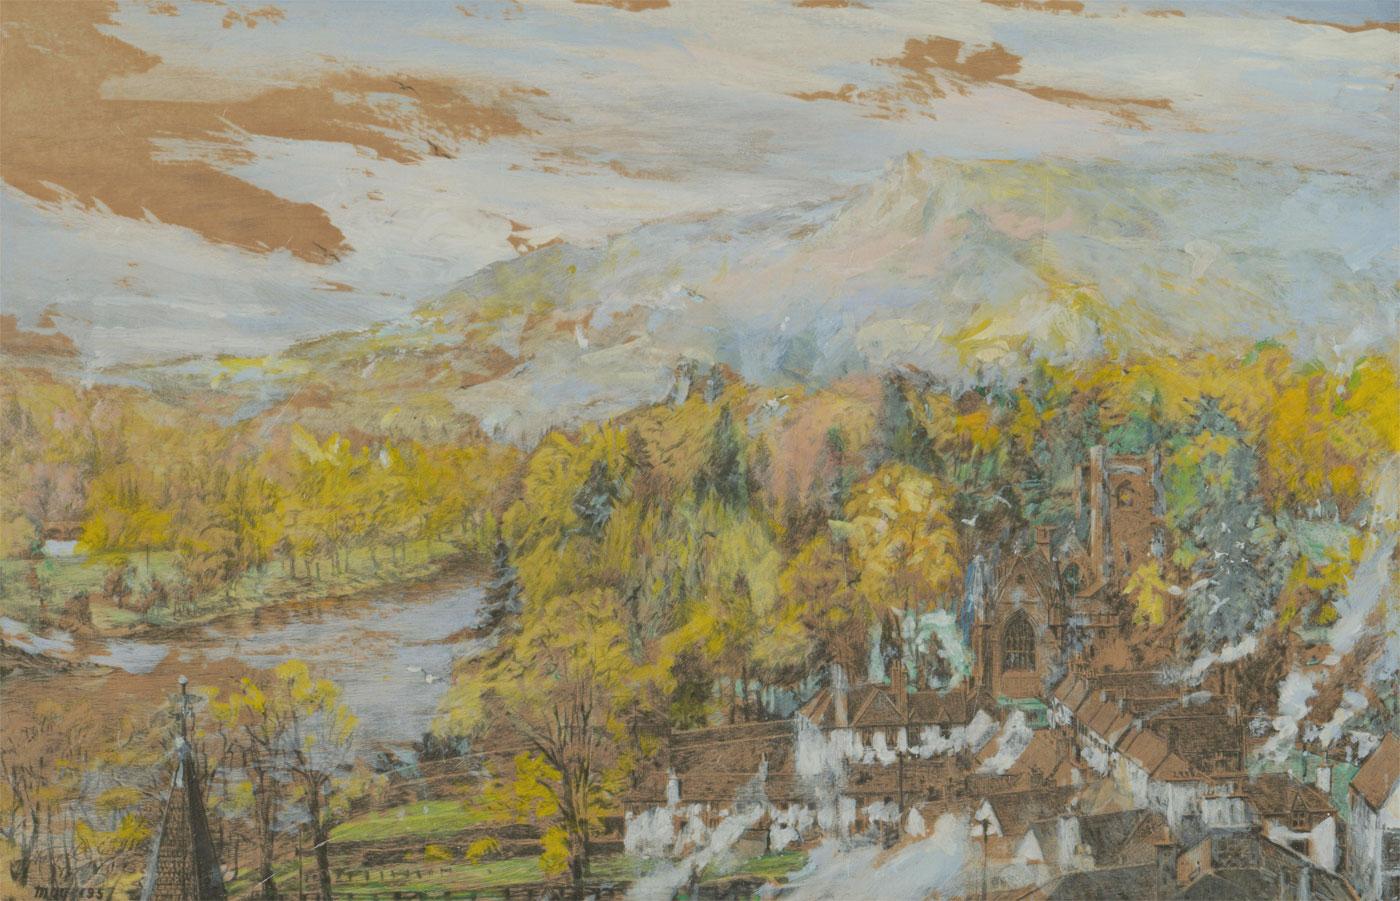 An interesting overpainted etching showing Dunkeld in Perthshire. The overpainting can be dated to 1957, as inscribed to the lower left corner. Inscribed 'View of Dunkeld, Perthshire, with the Cathedral and River Tay, painted by Harold Wyllie and